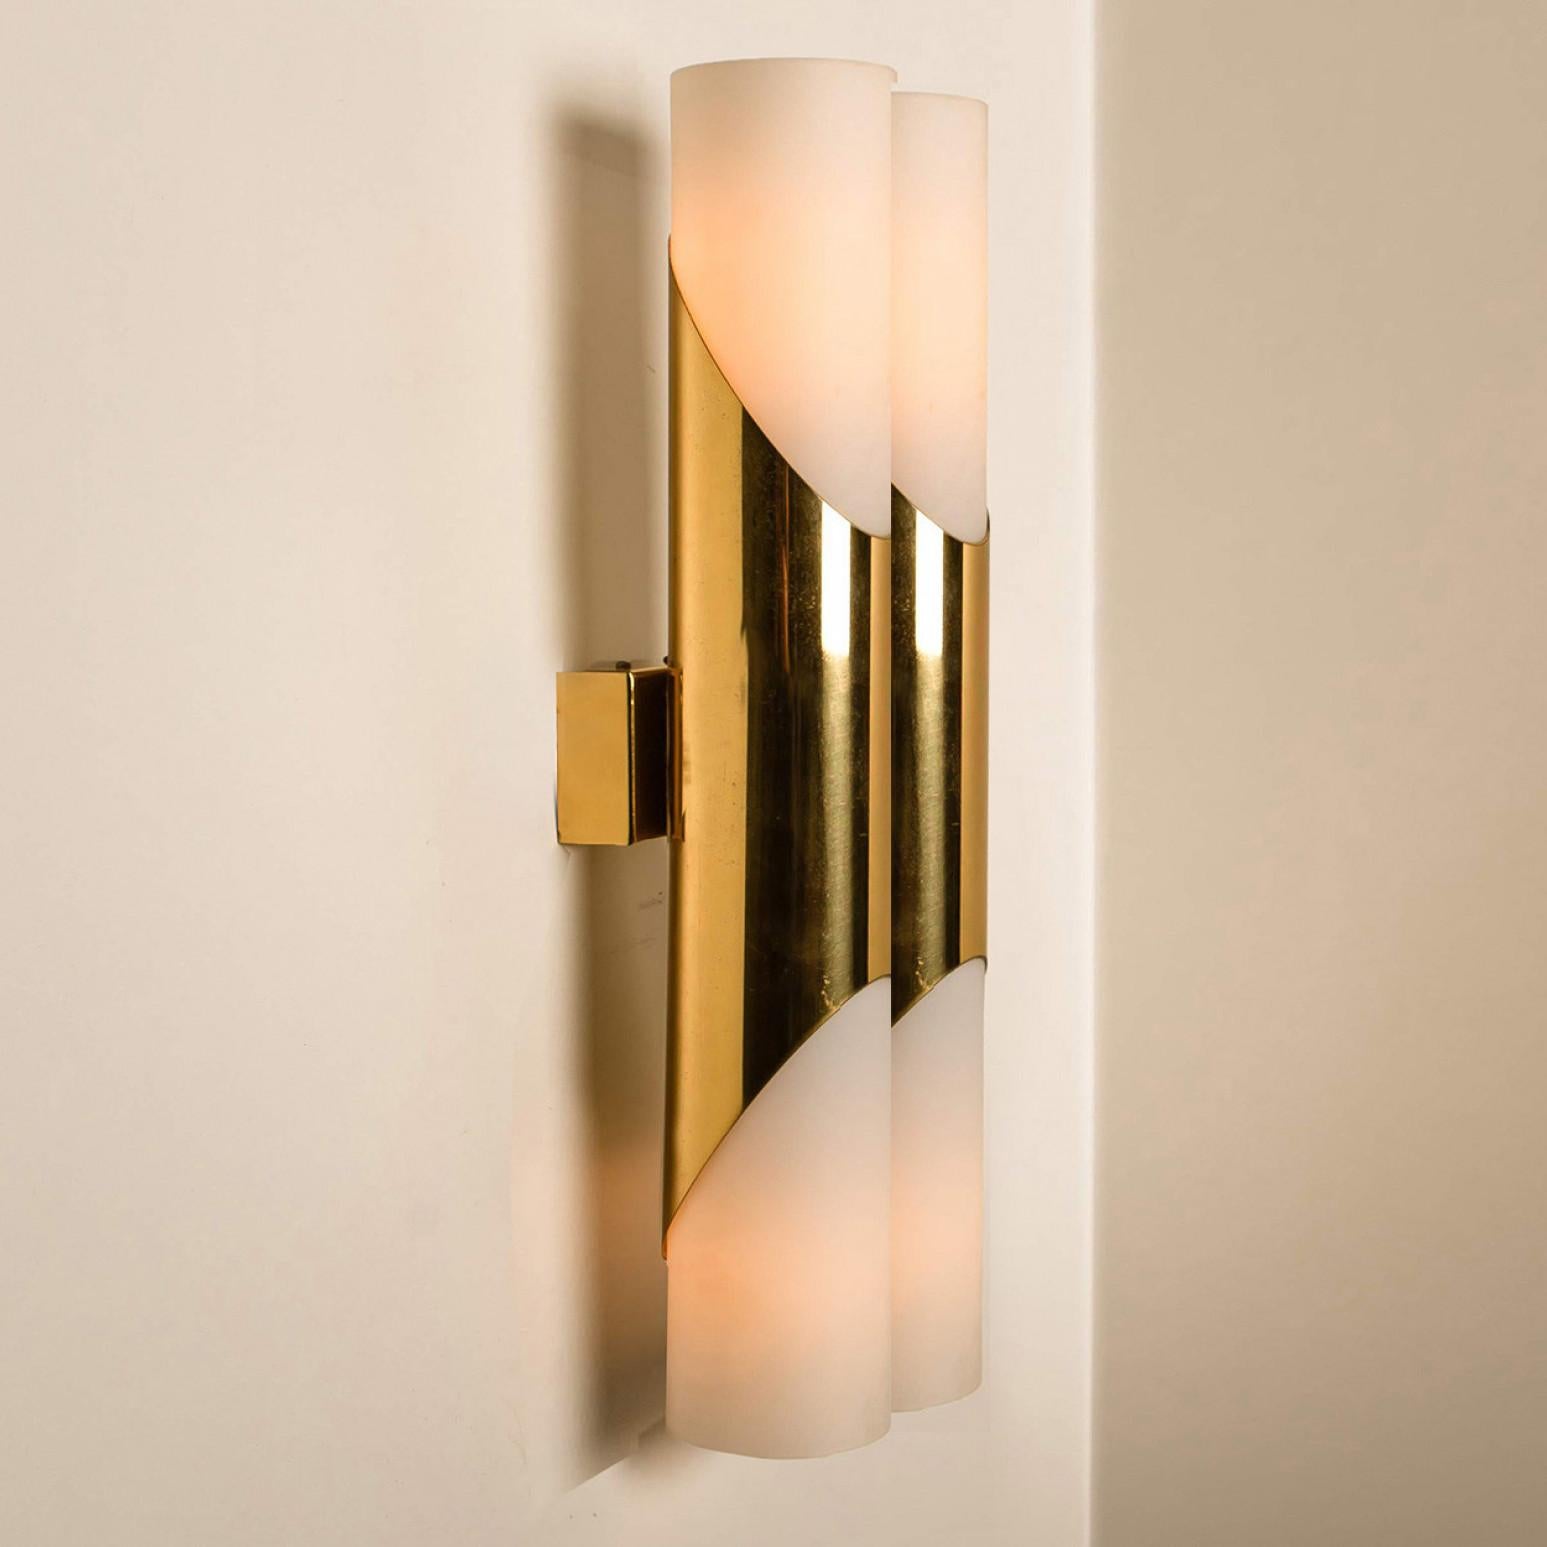 Late 20th Century Several Wall Sconces or Wall Lights in the Style of RAAK Amsterdam, 1970s For Sale